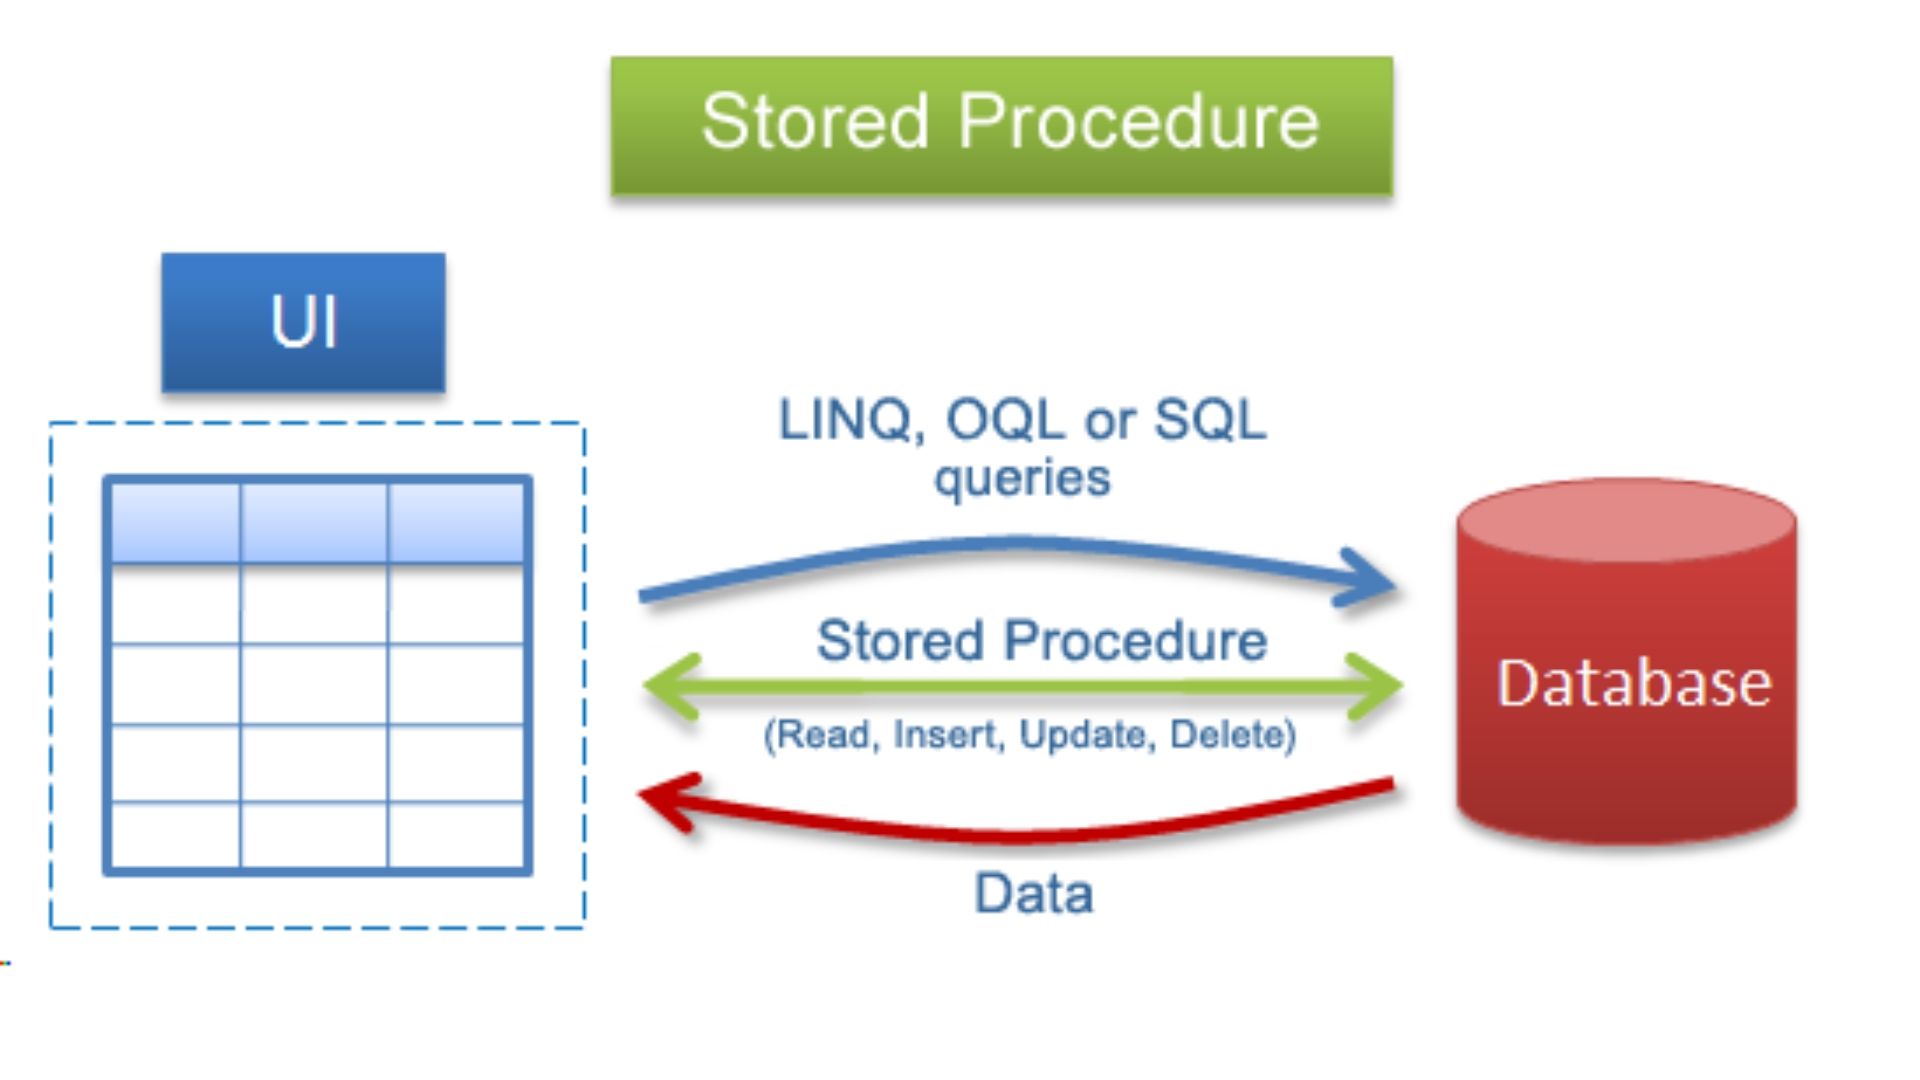 Learn about Stored Procedures in SQL